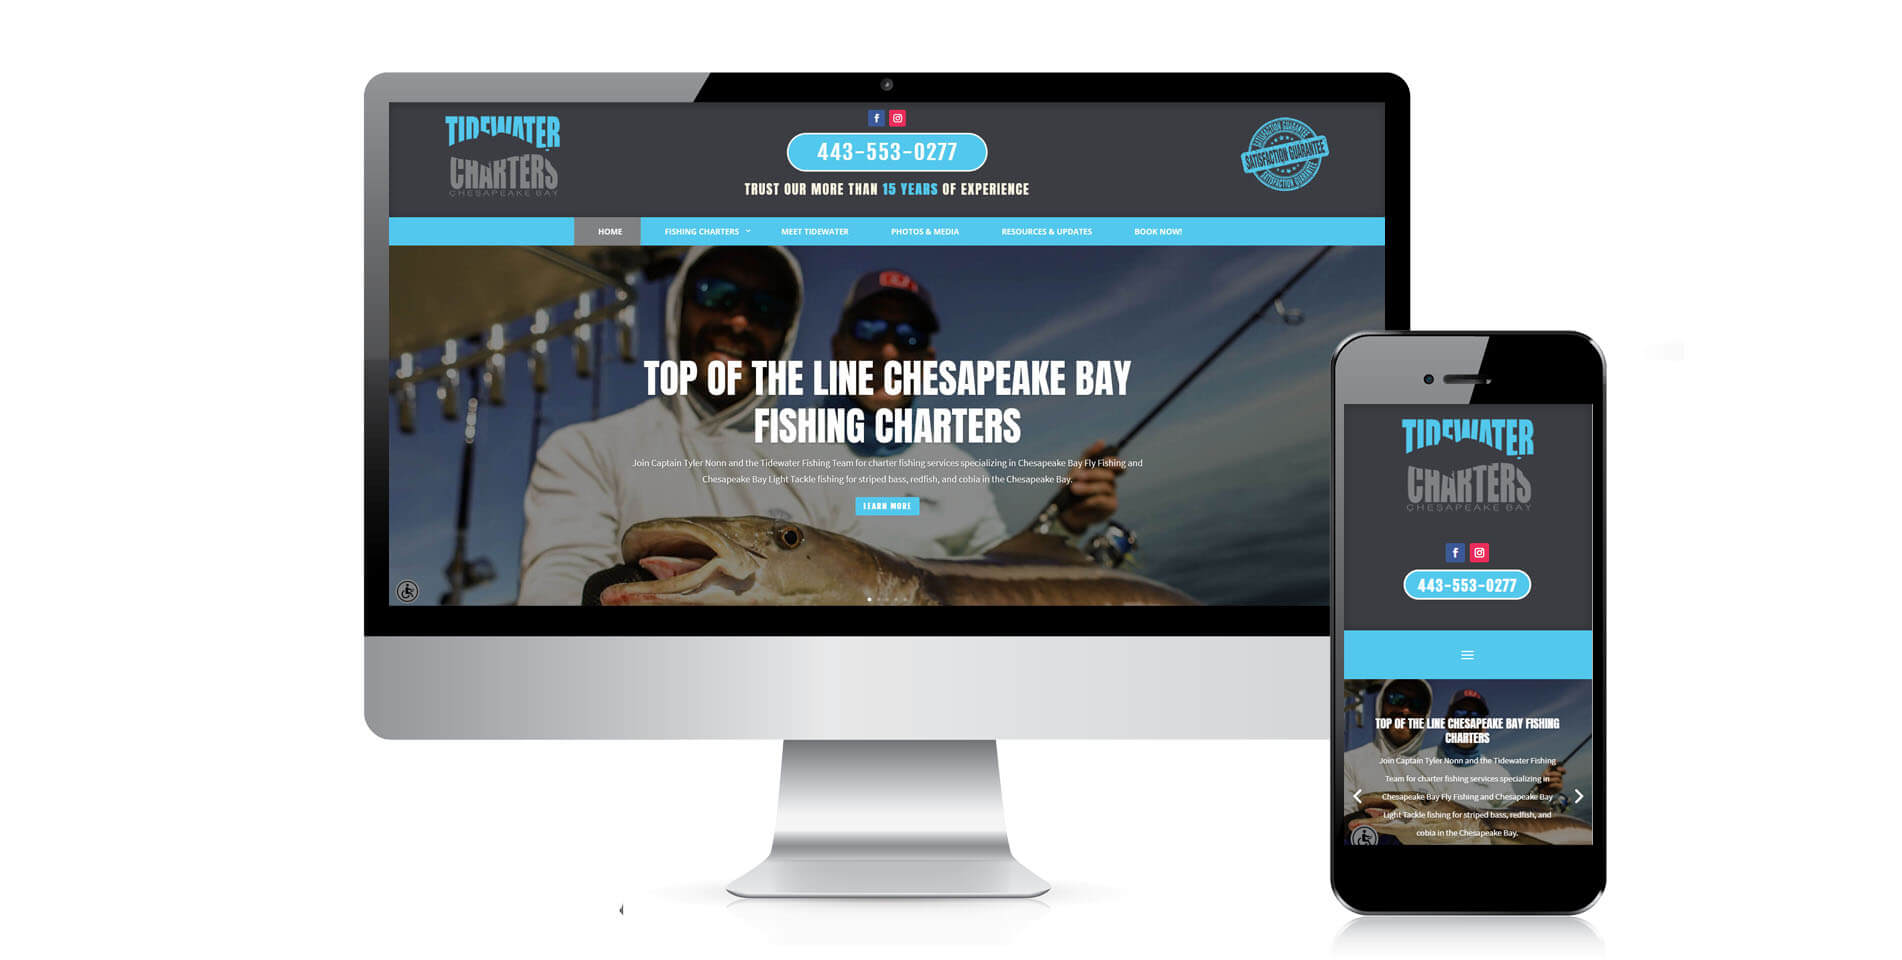 An image of the responsive design of Tidewater Charters, website created by Not Fade Away Marketing